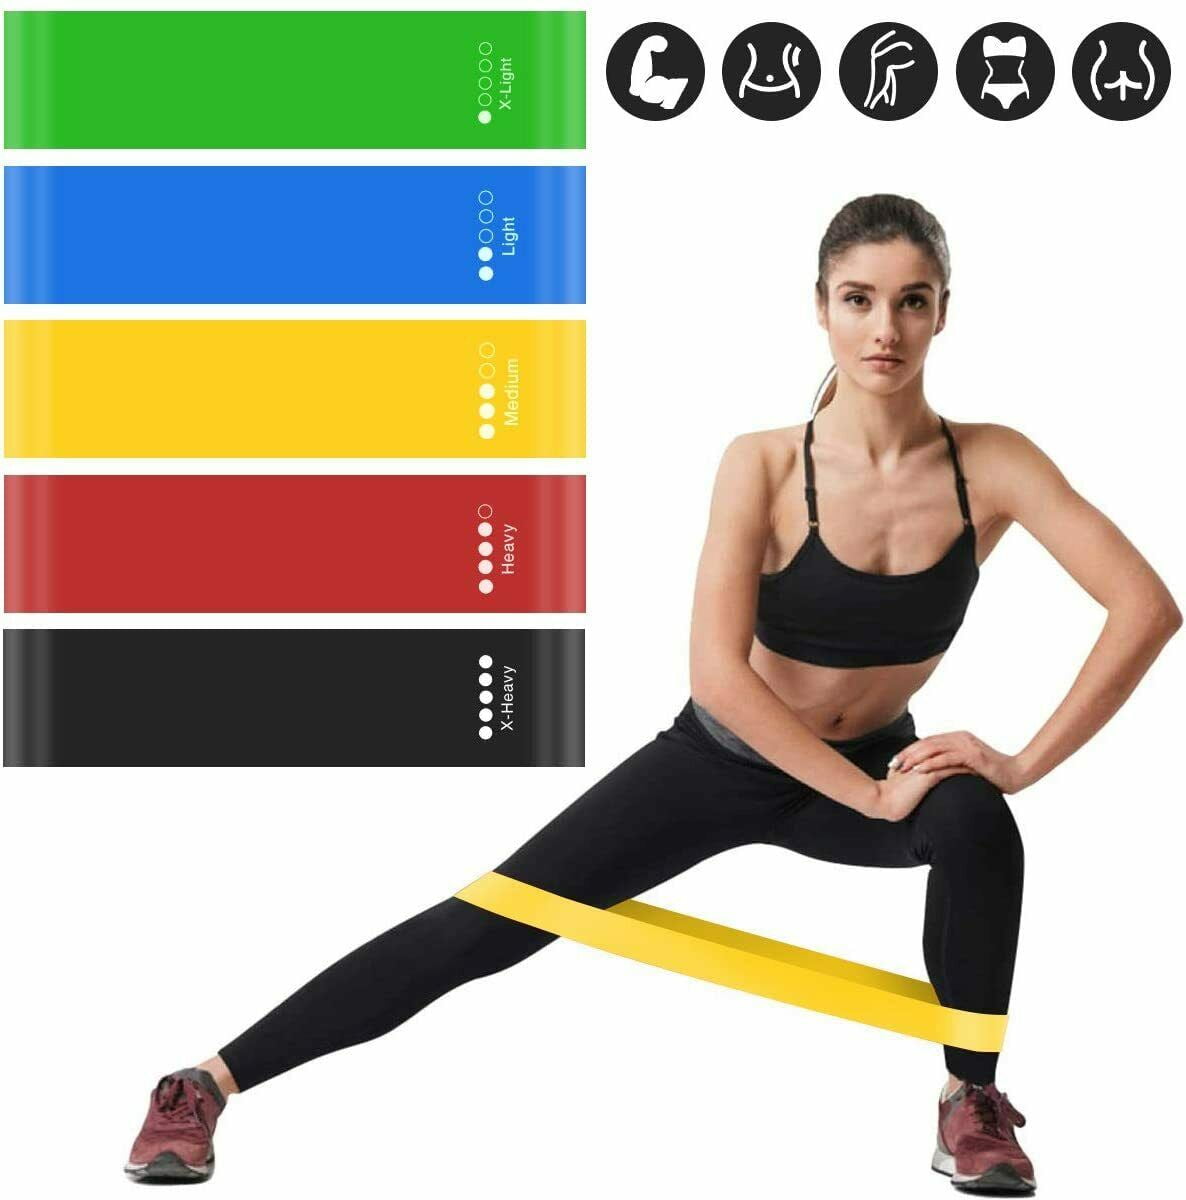 Gym Resistance Bands Set 5 Loop Home Exercise Keep Fit Physio Fitness Health 